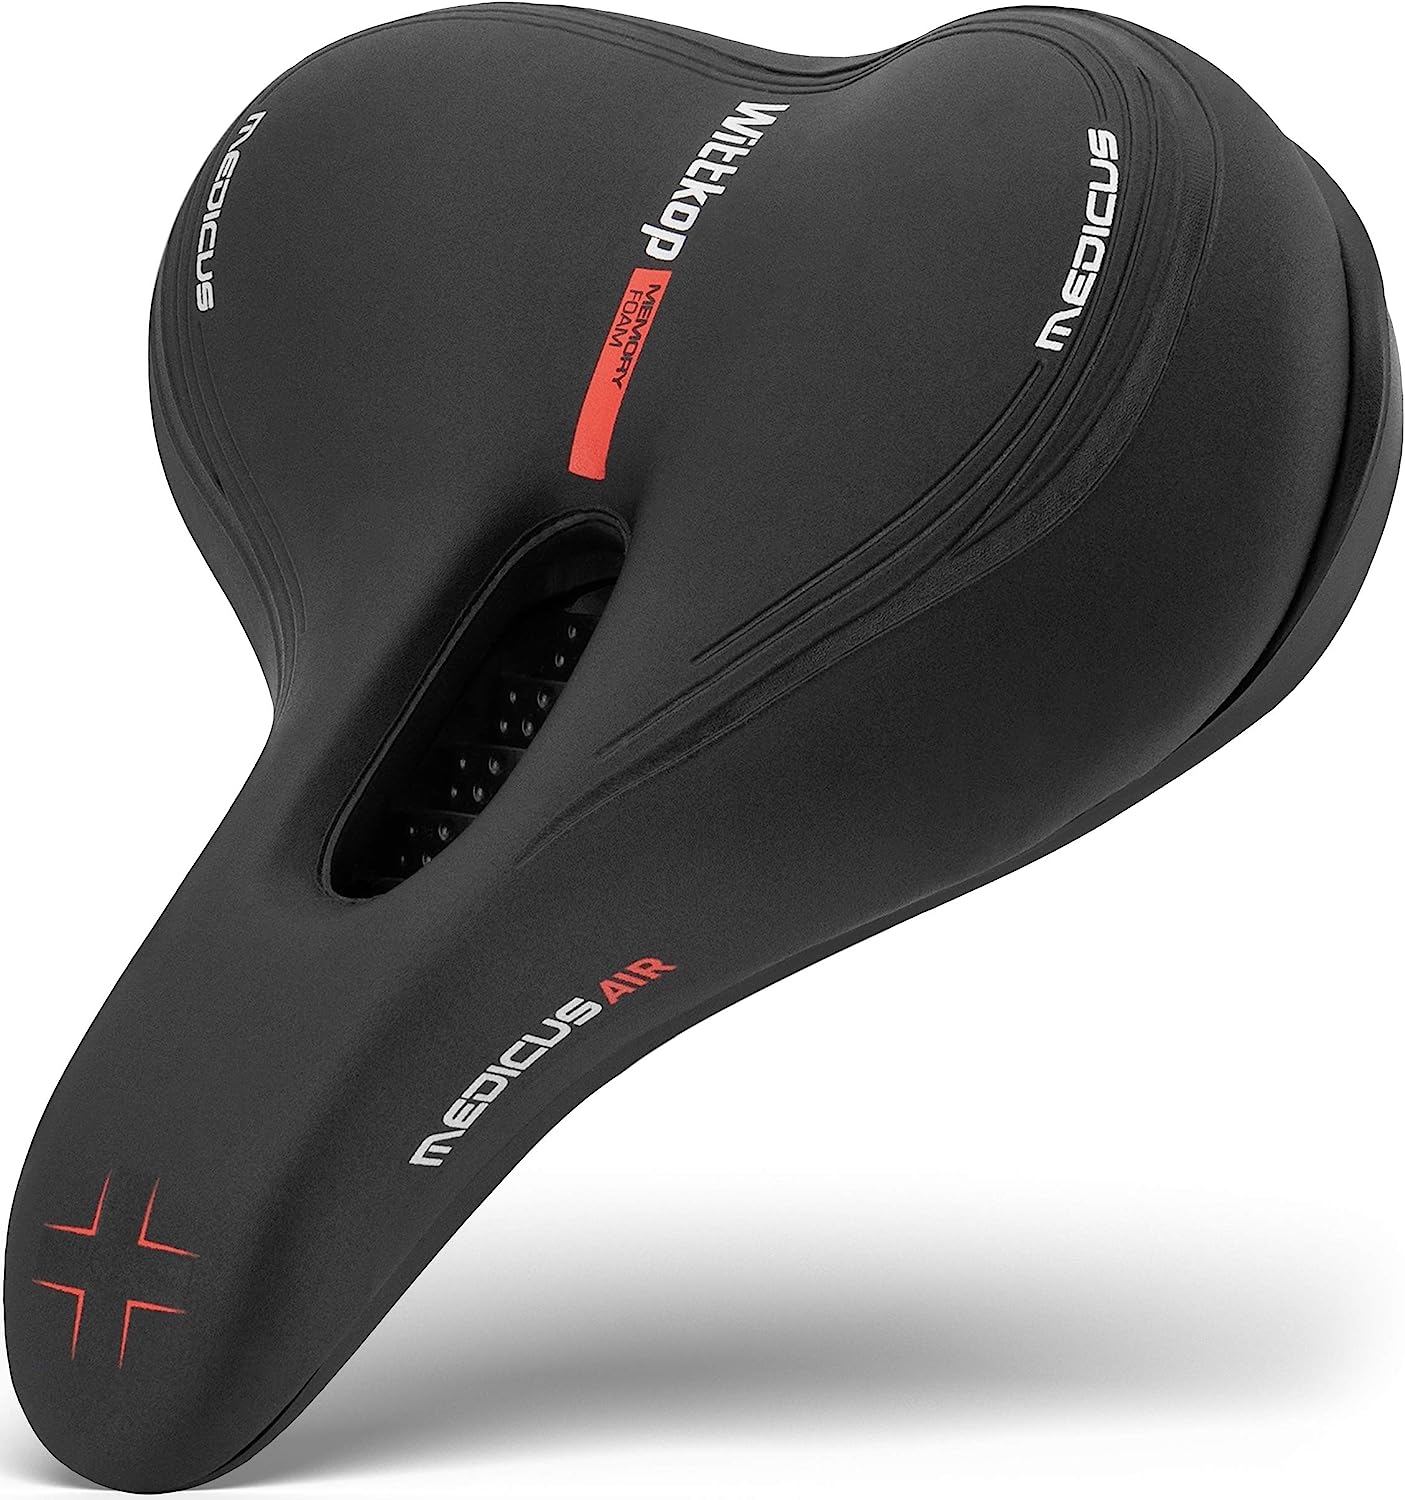 Bike Seat I Bicycle Seat for Men and Women, Waterproof Bike Saddle with Innovative 5-Zone-Concept I Exercise Bike Seat for BMX, MTB & Road